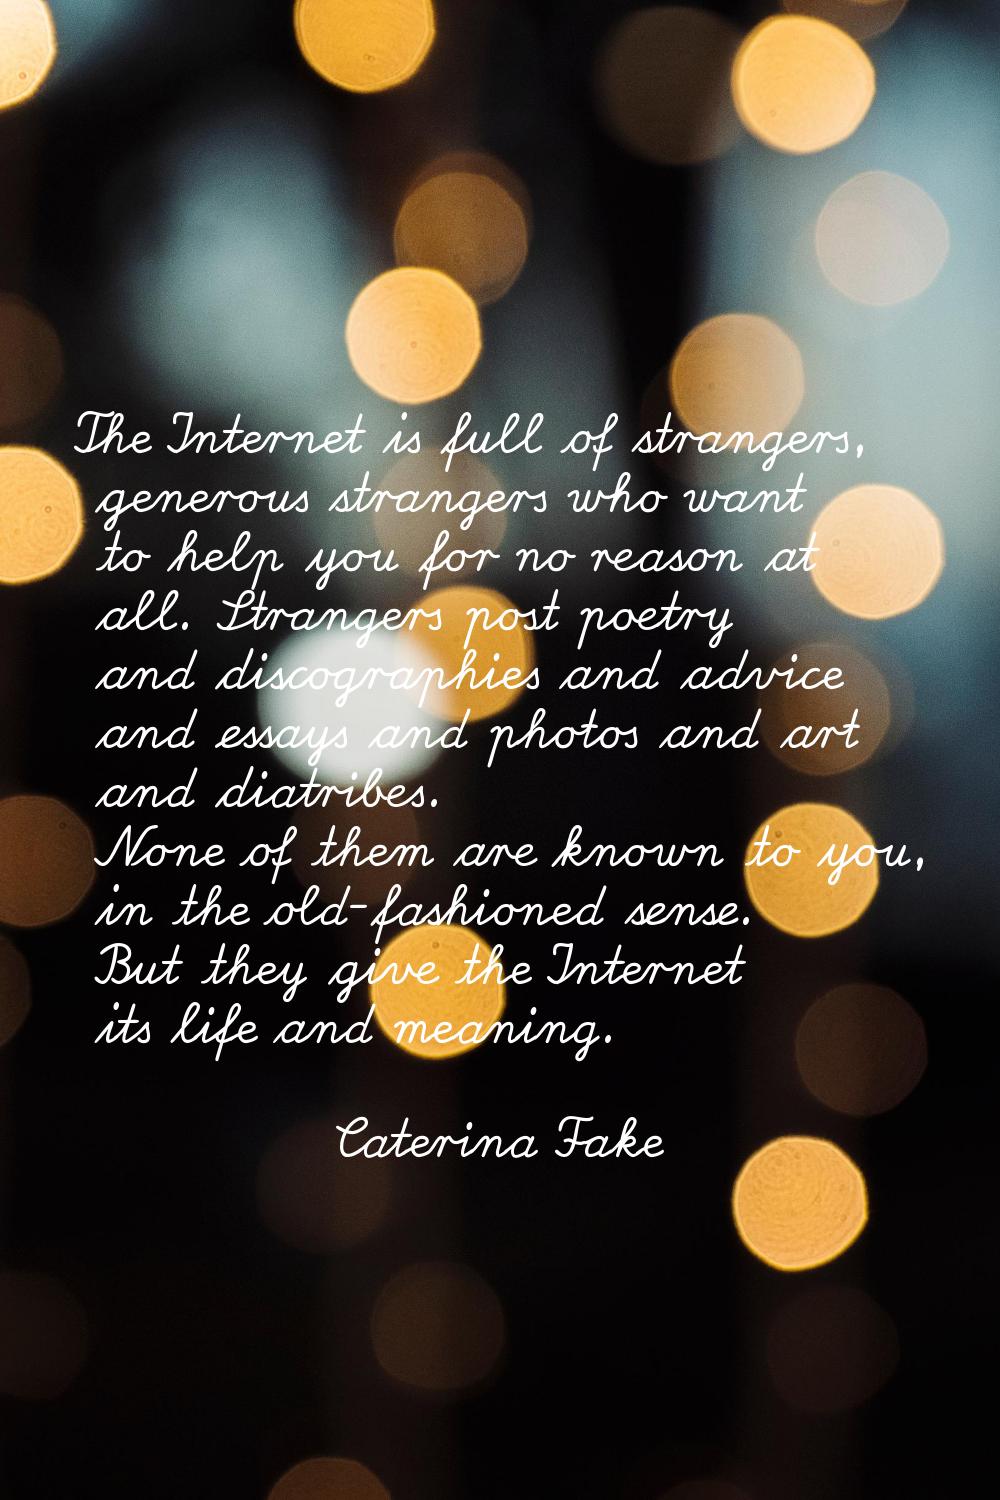 The Internet is full of strangers, generous strangers who want to help you for no reason at all. St